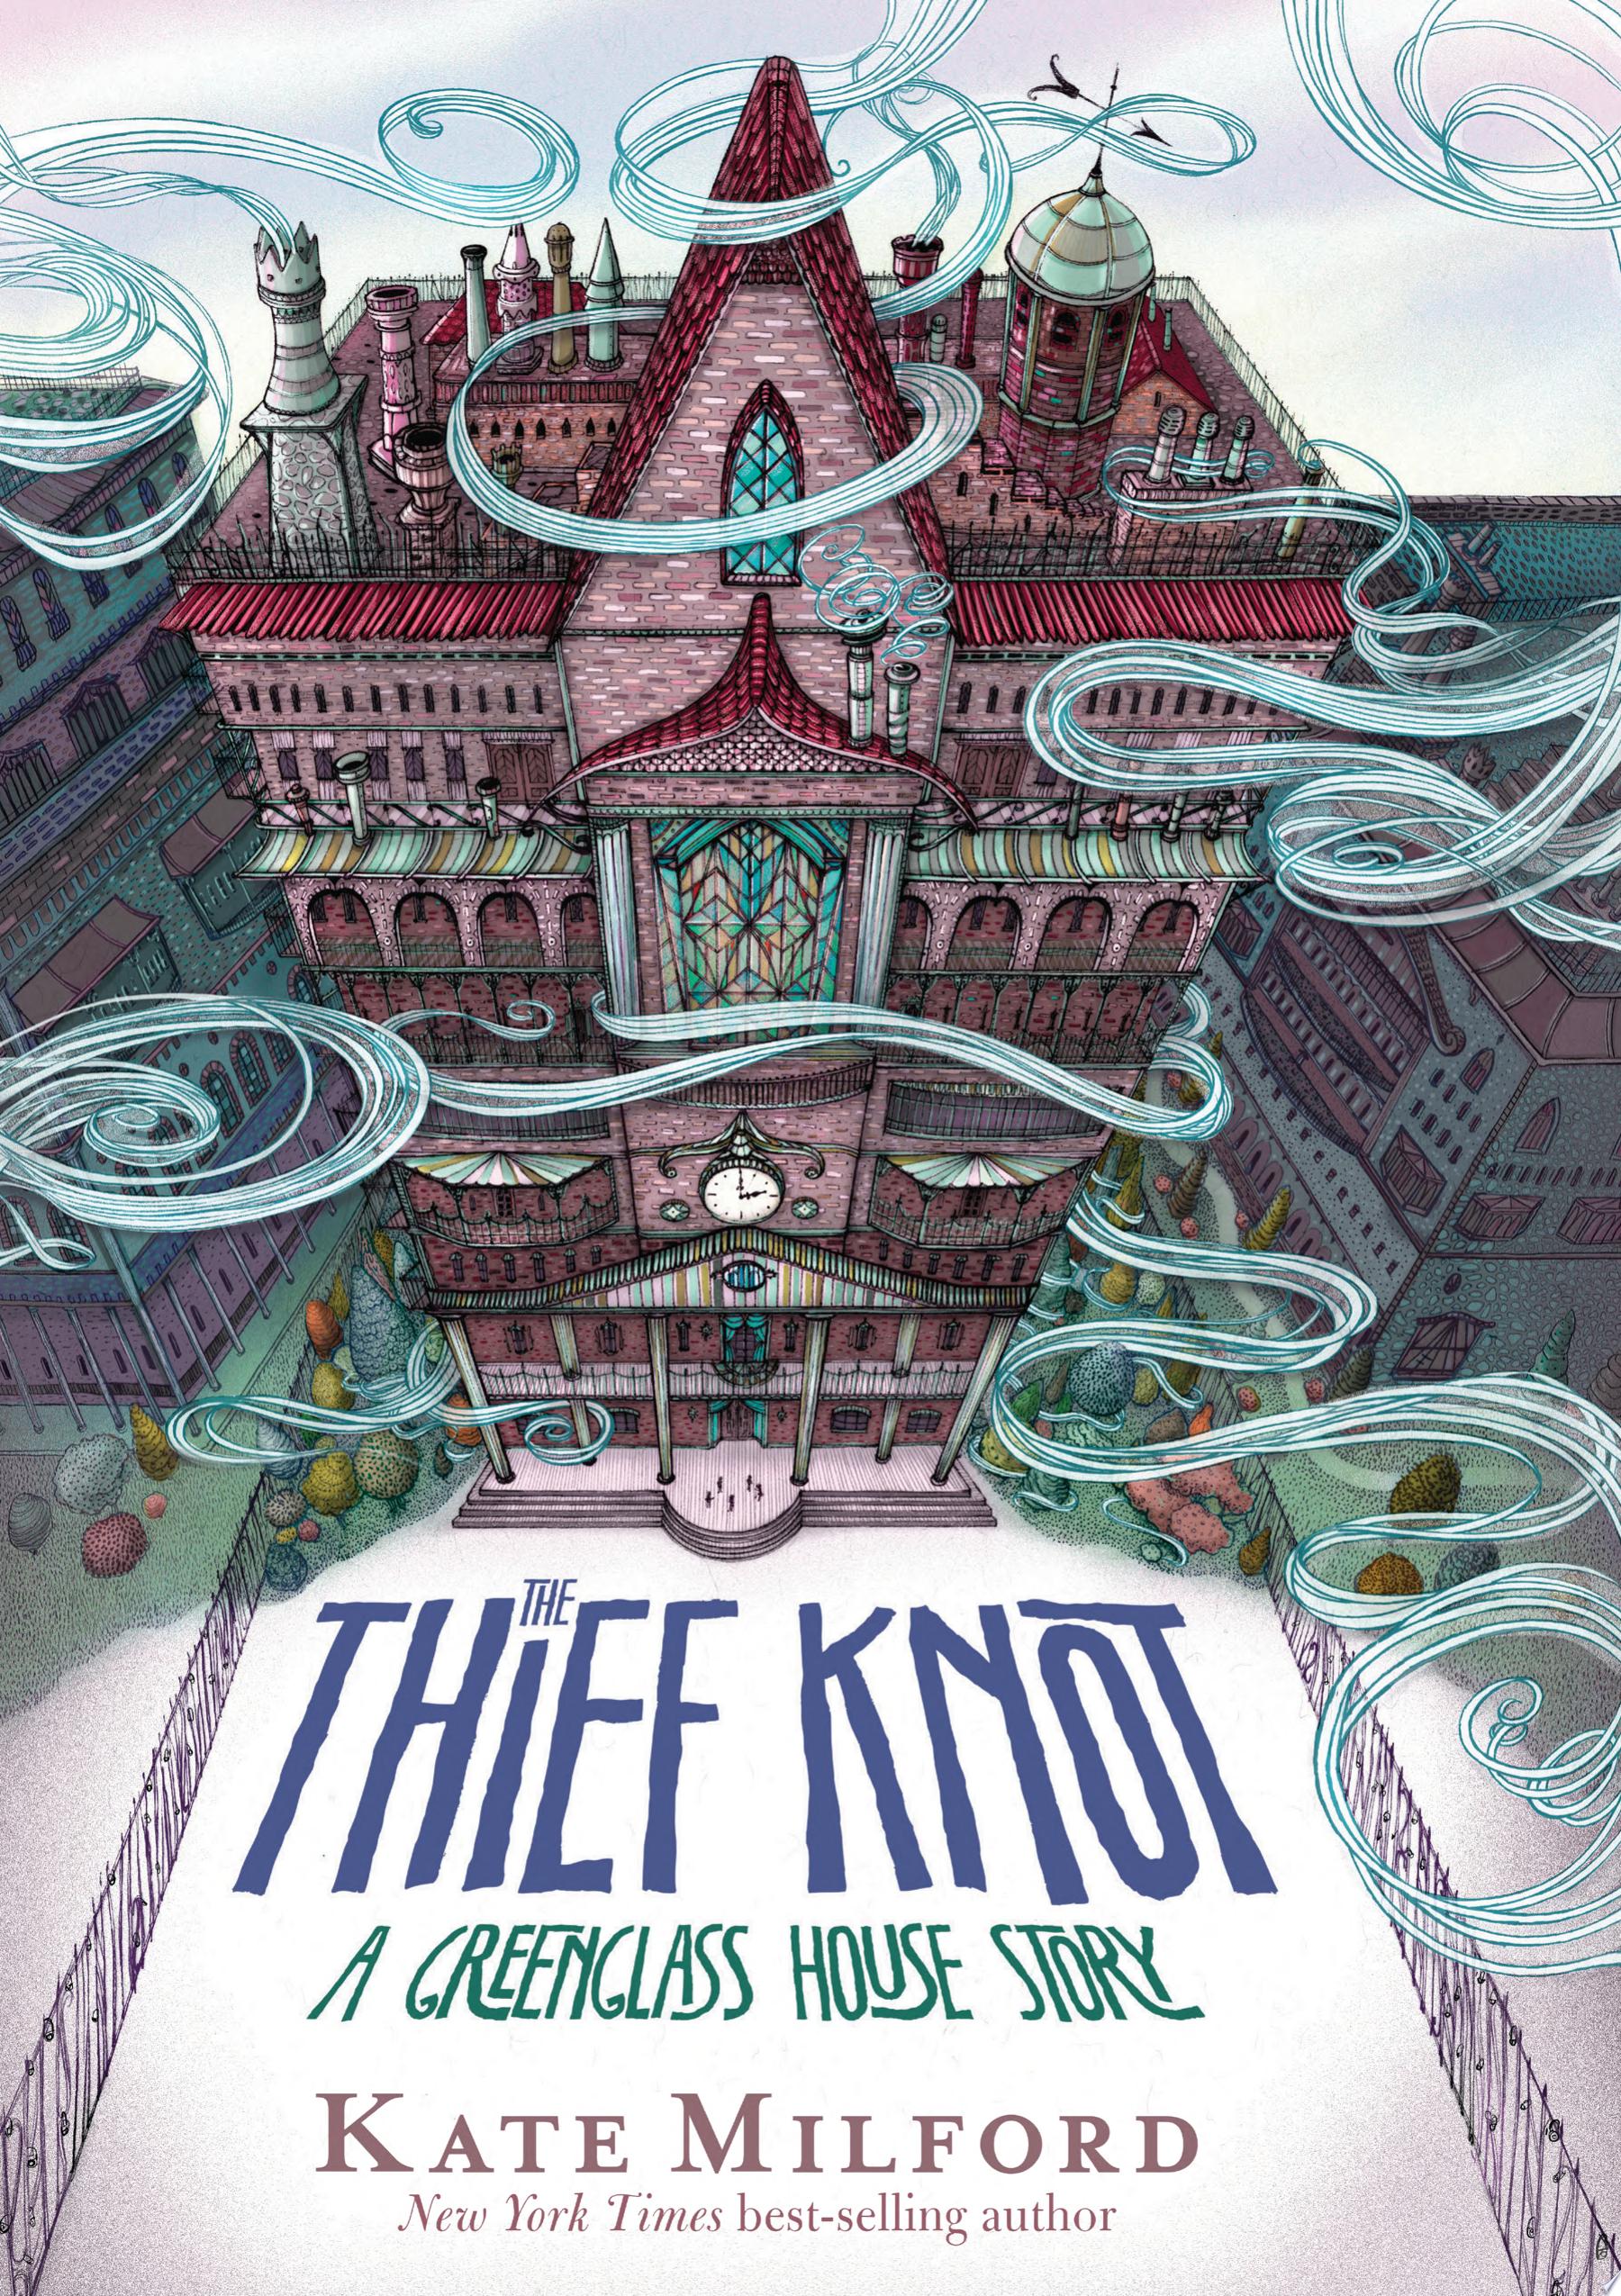 Image for "The Thief Knot"